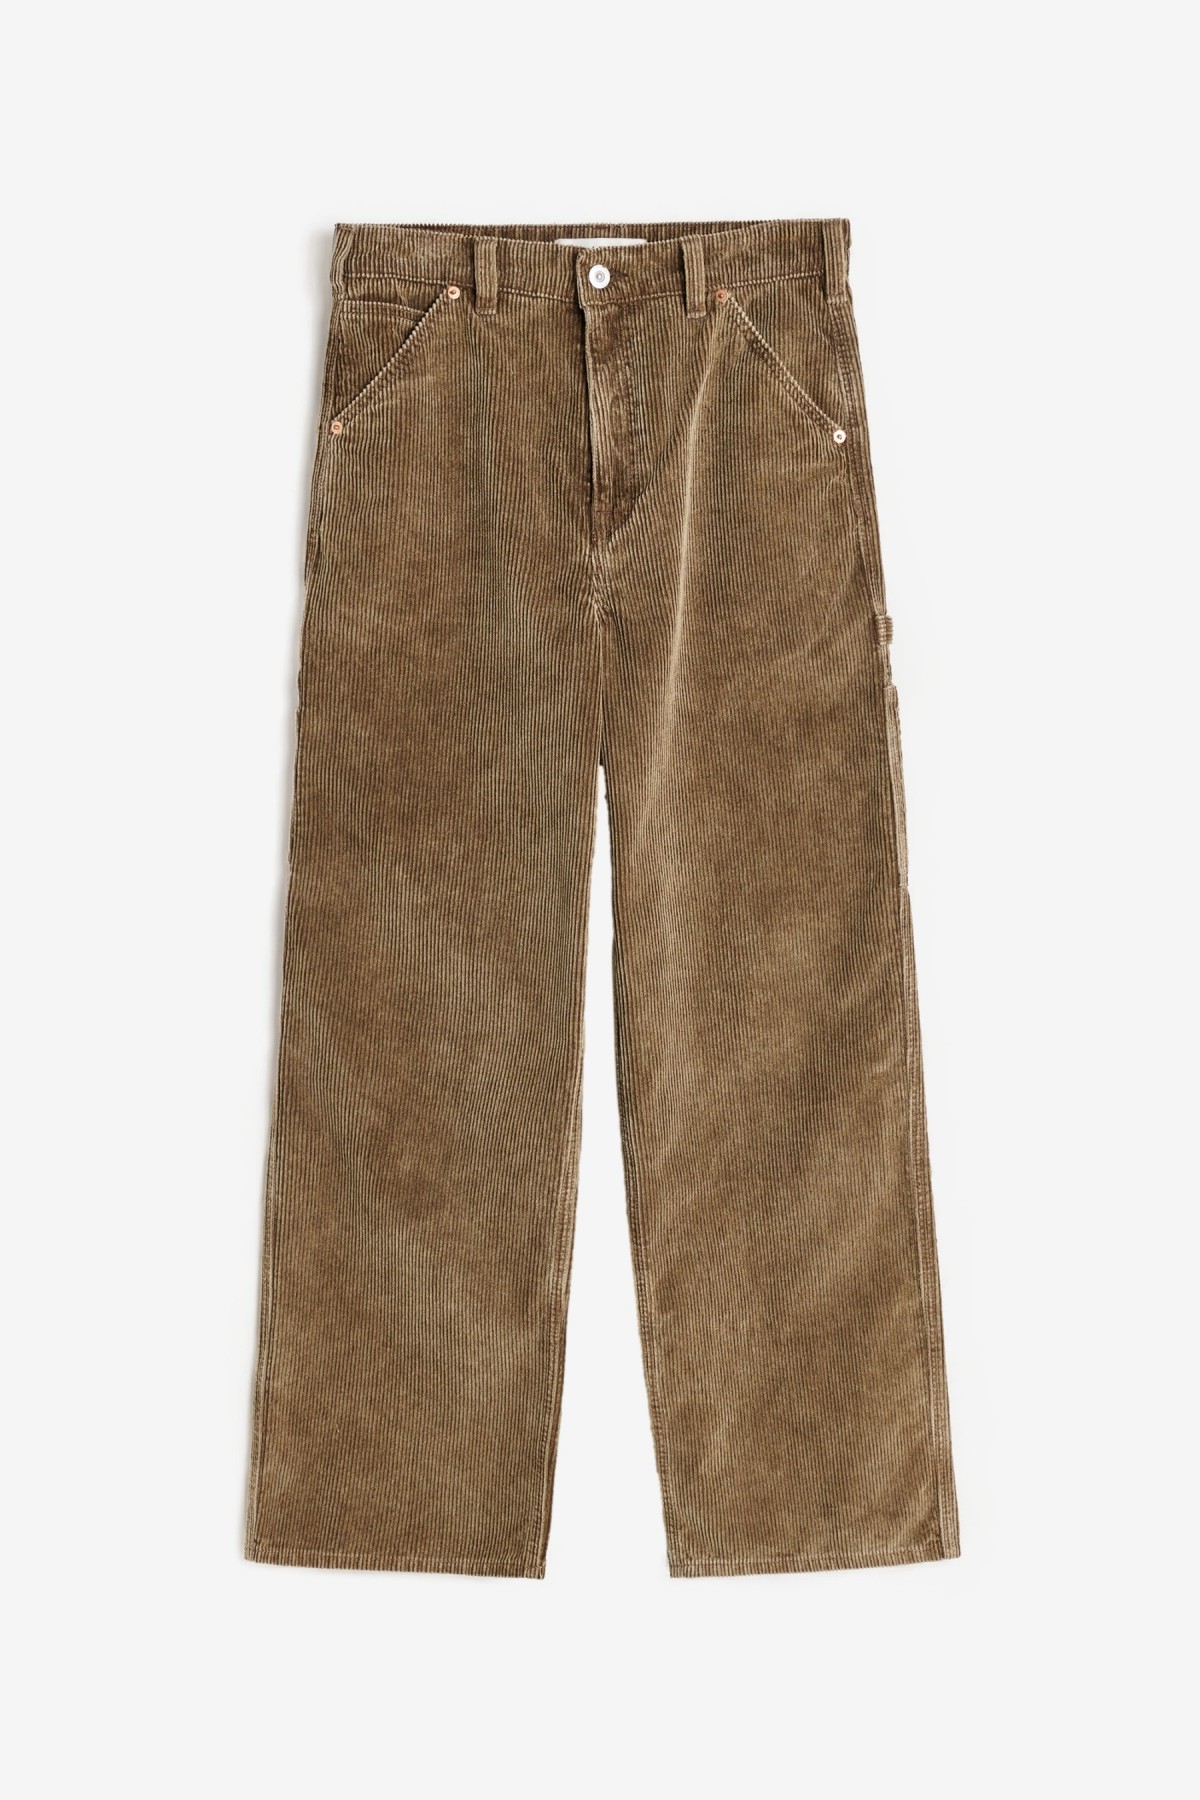 Our Legacy Joiner Trouser in Brown Enzyme Cord